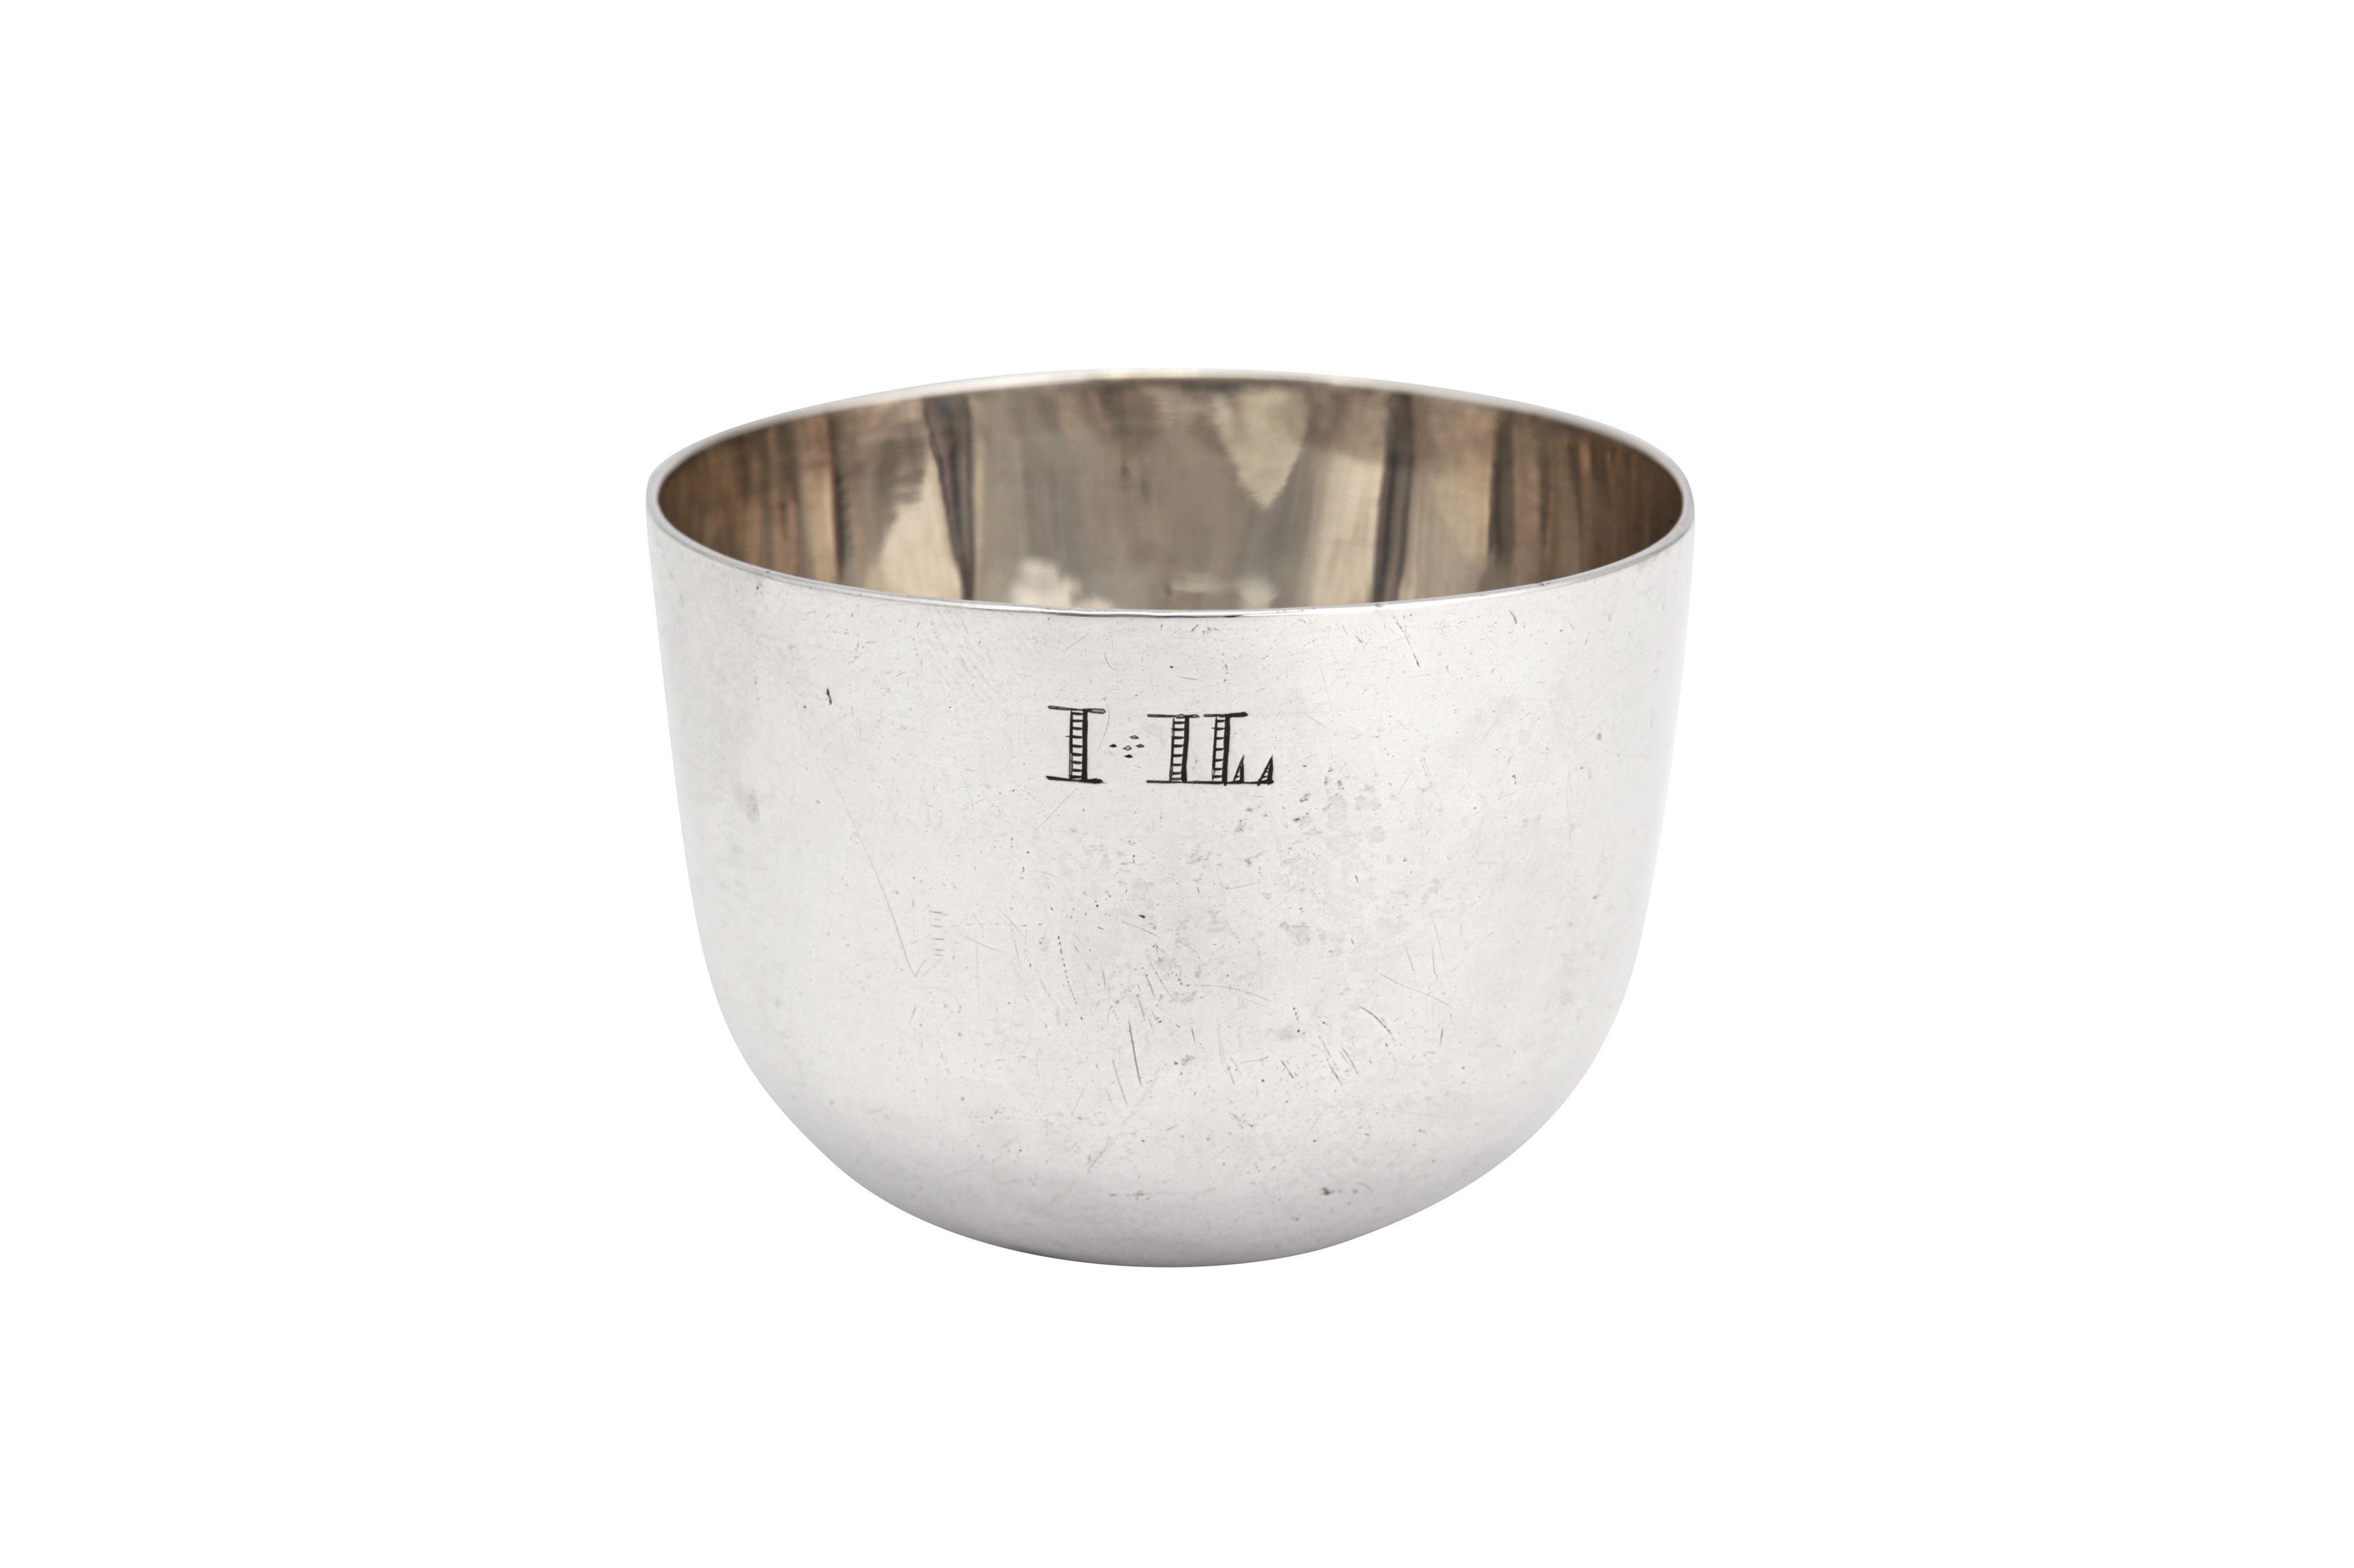 A George III provincial sterling silver tumbler, Chester possibly 1771 by Richard Richardson